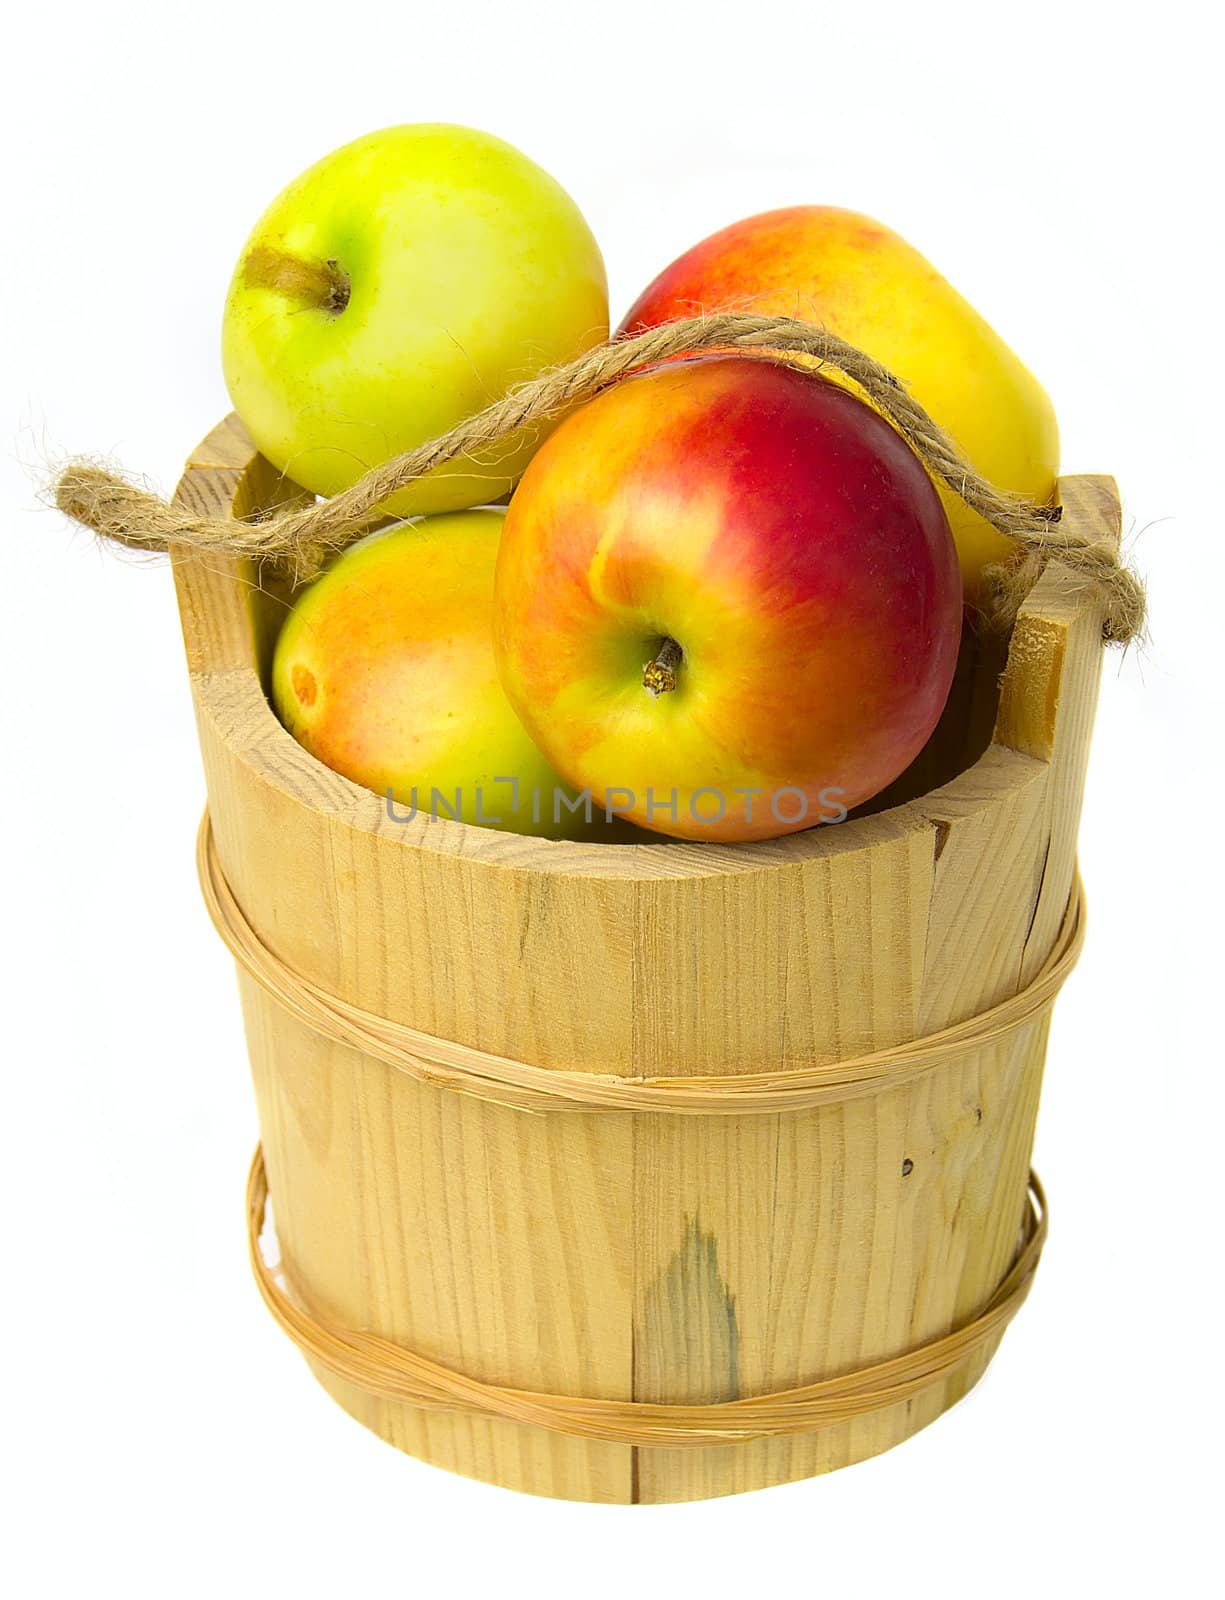 Wood basket with apples on white background